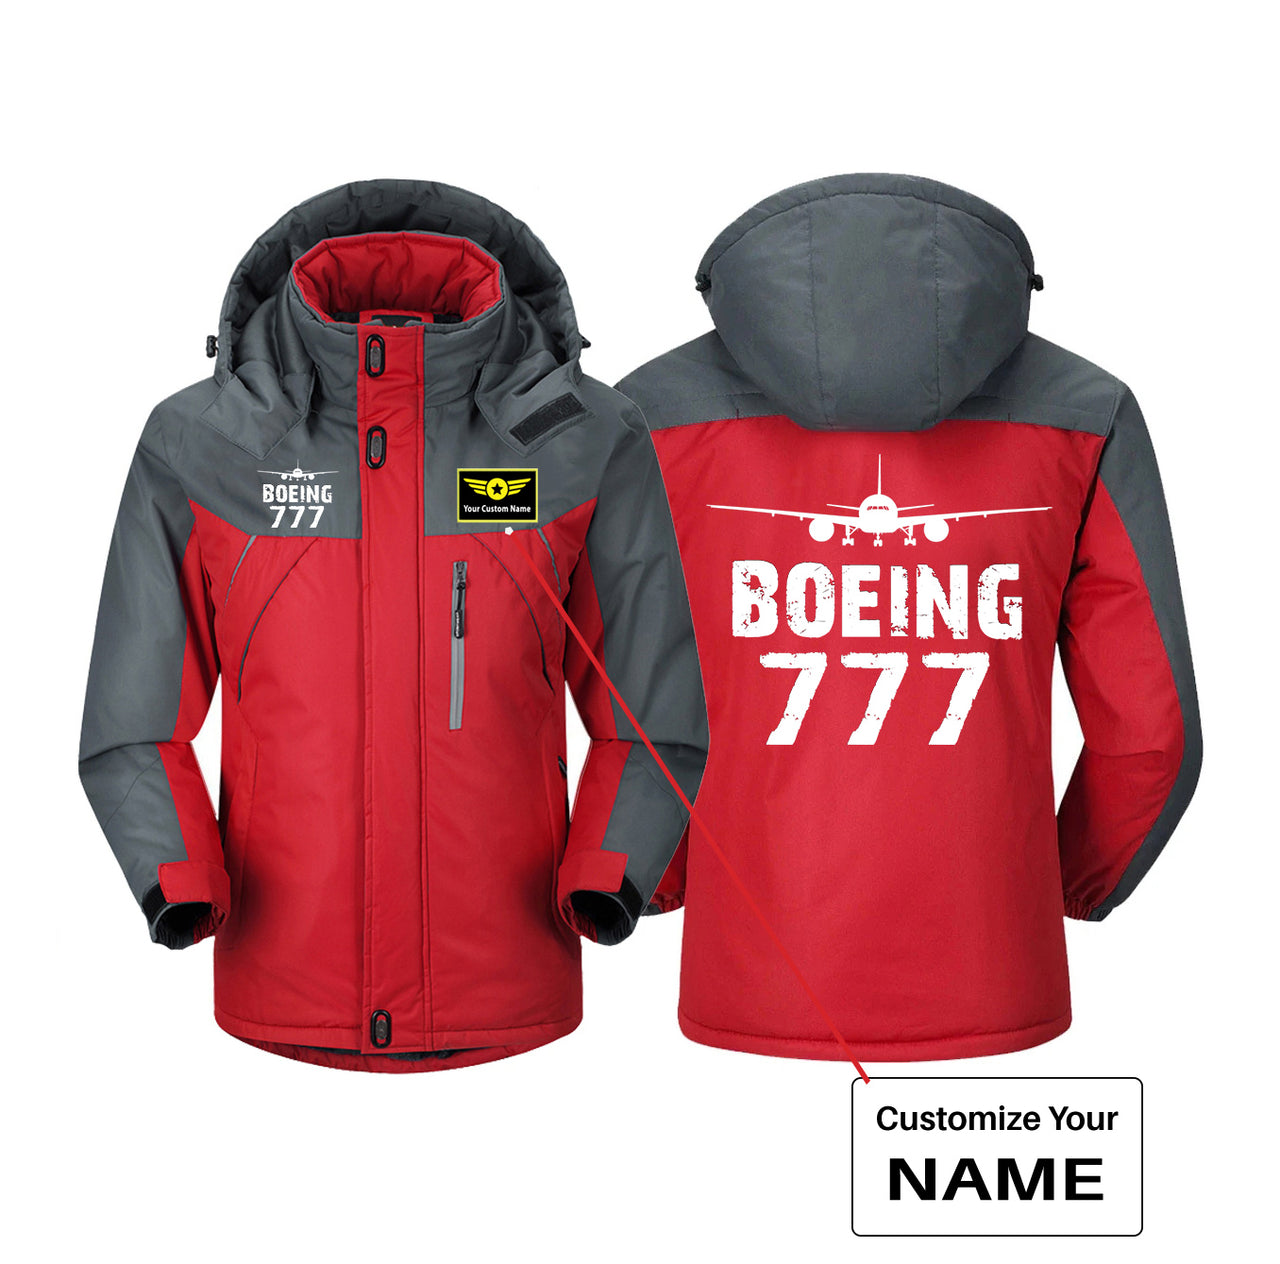 Boeing 777 & Plane Designed Thick Winter Jackets